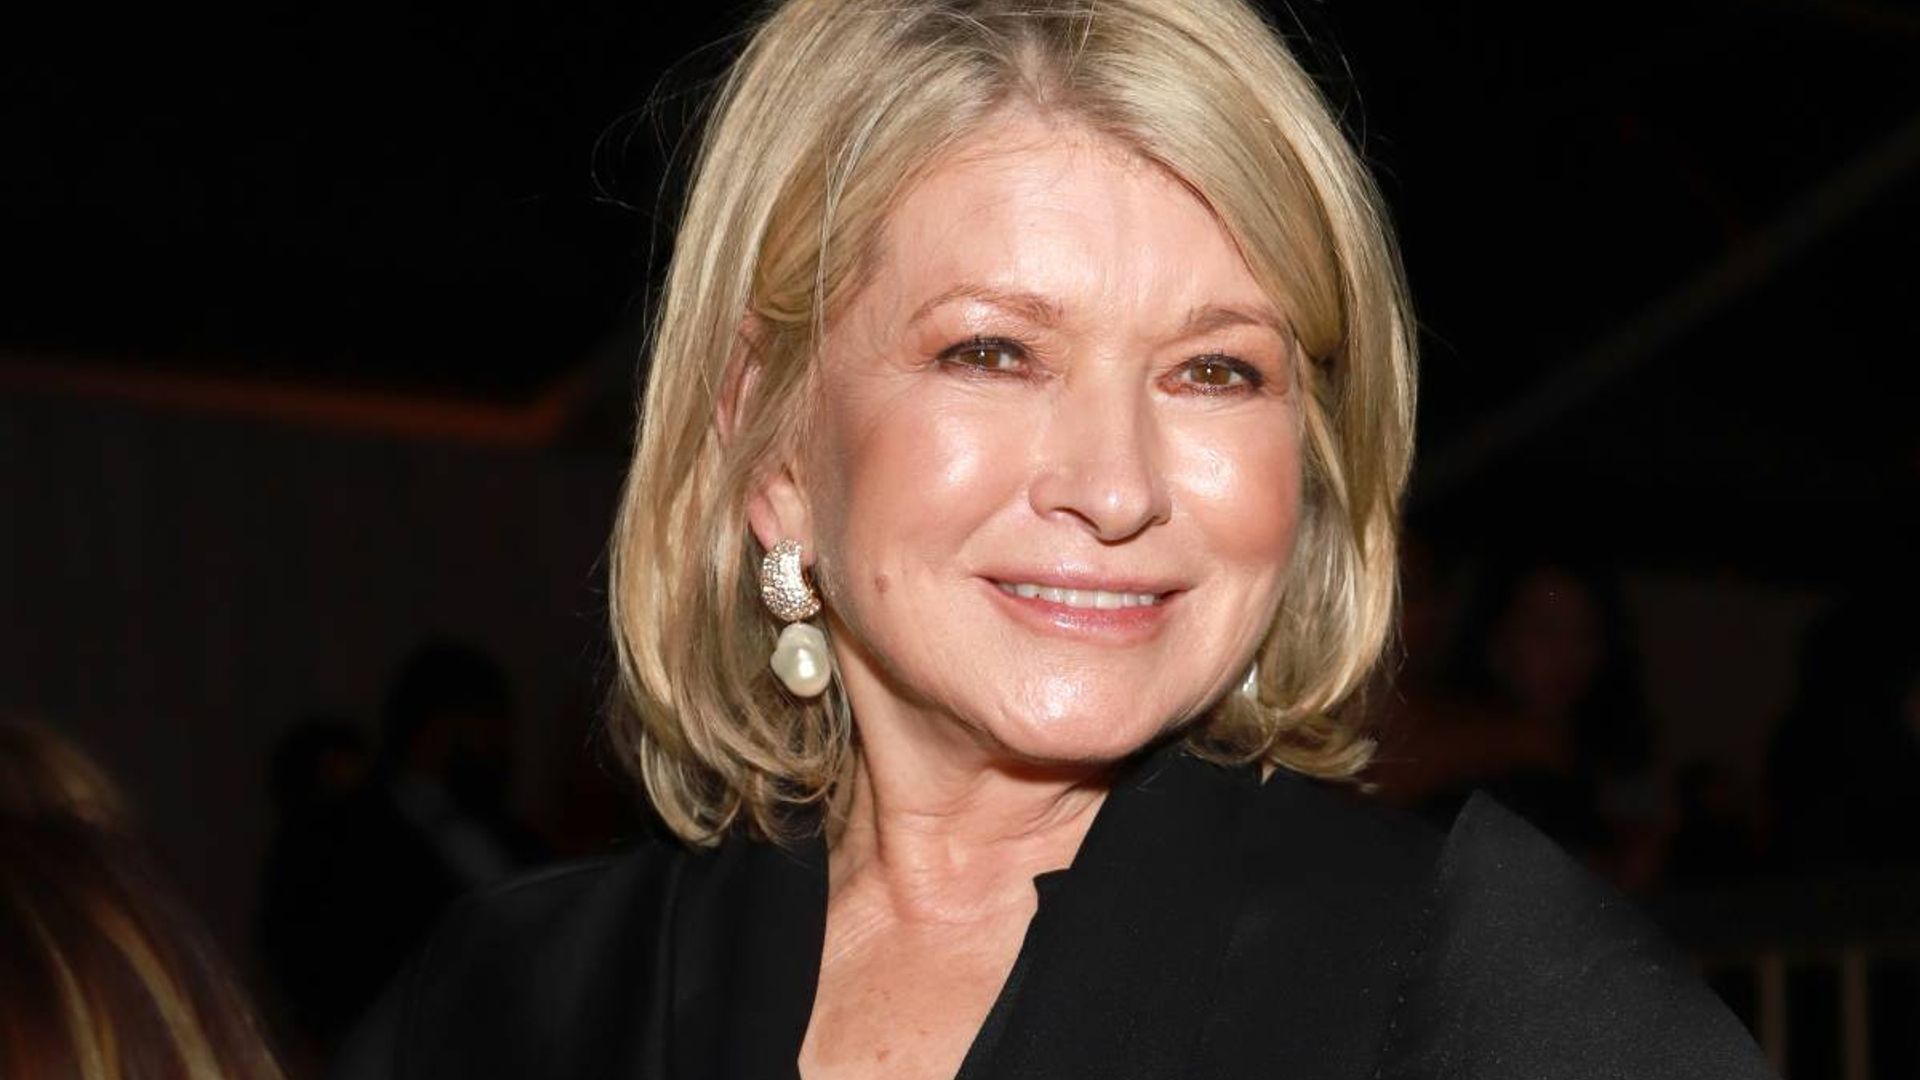 Martha Stewart looks incredibly youthful in LBD - and fans are blown away